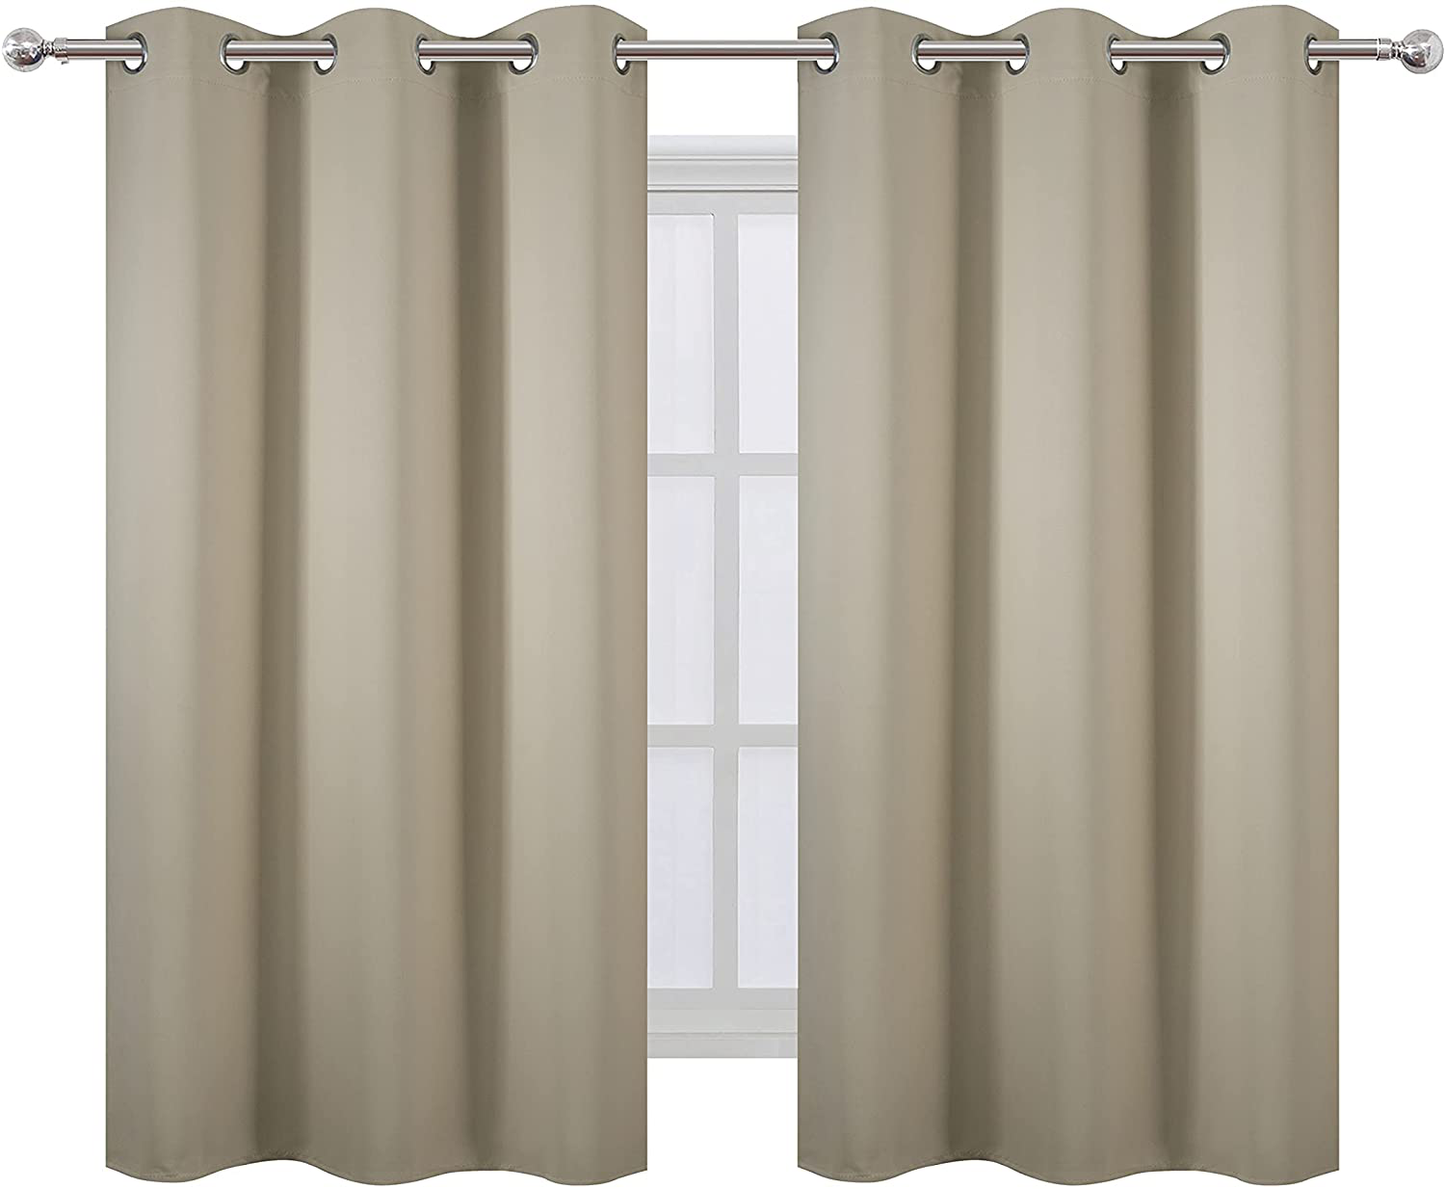 LEMOMO Purple Blackout Curtains 52 x 84 Inch Length/Set of 2 Curtain Panels/Thermal Insulated Room Darkening Curtains for Bedroom